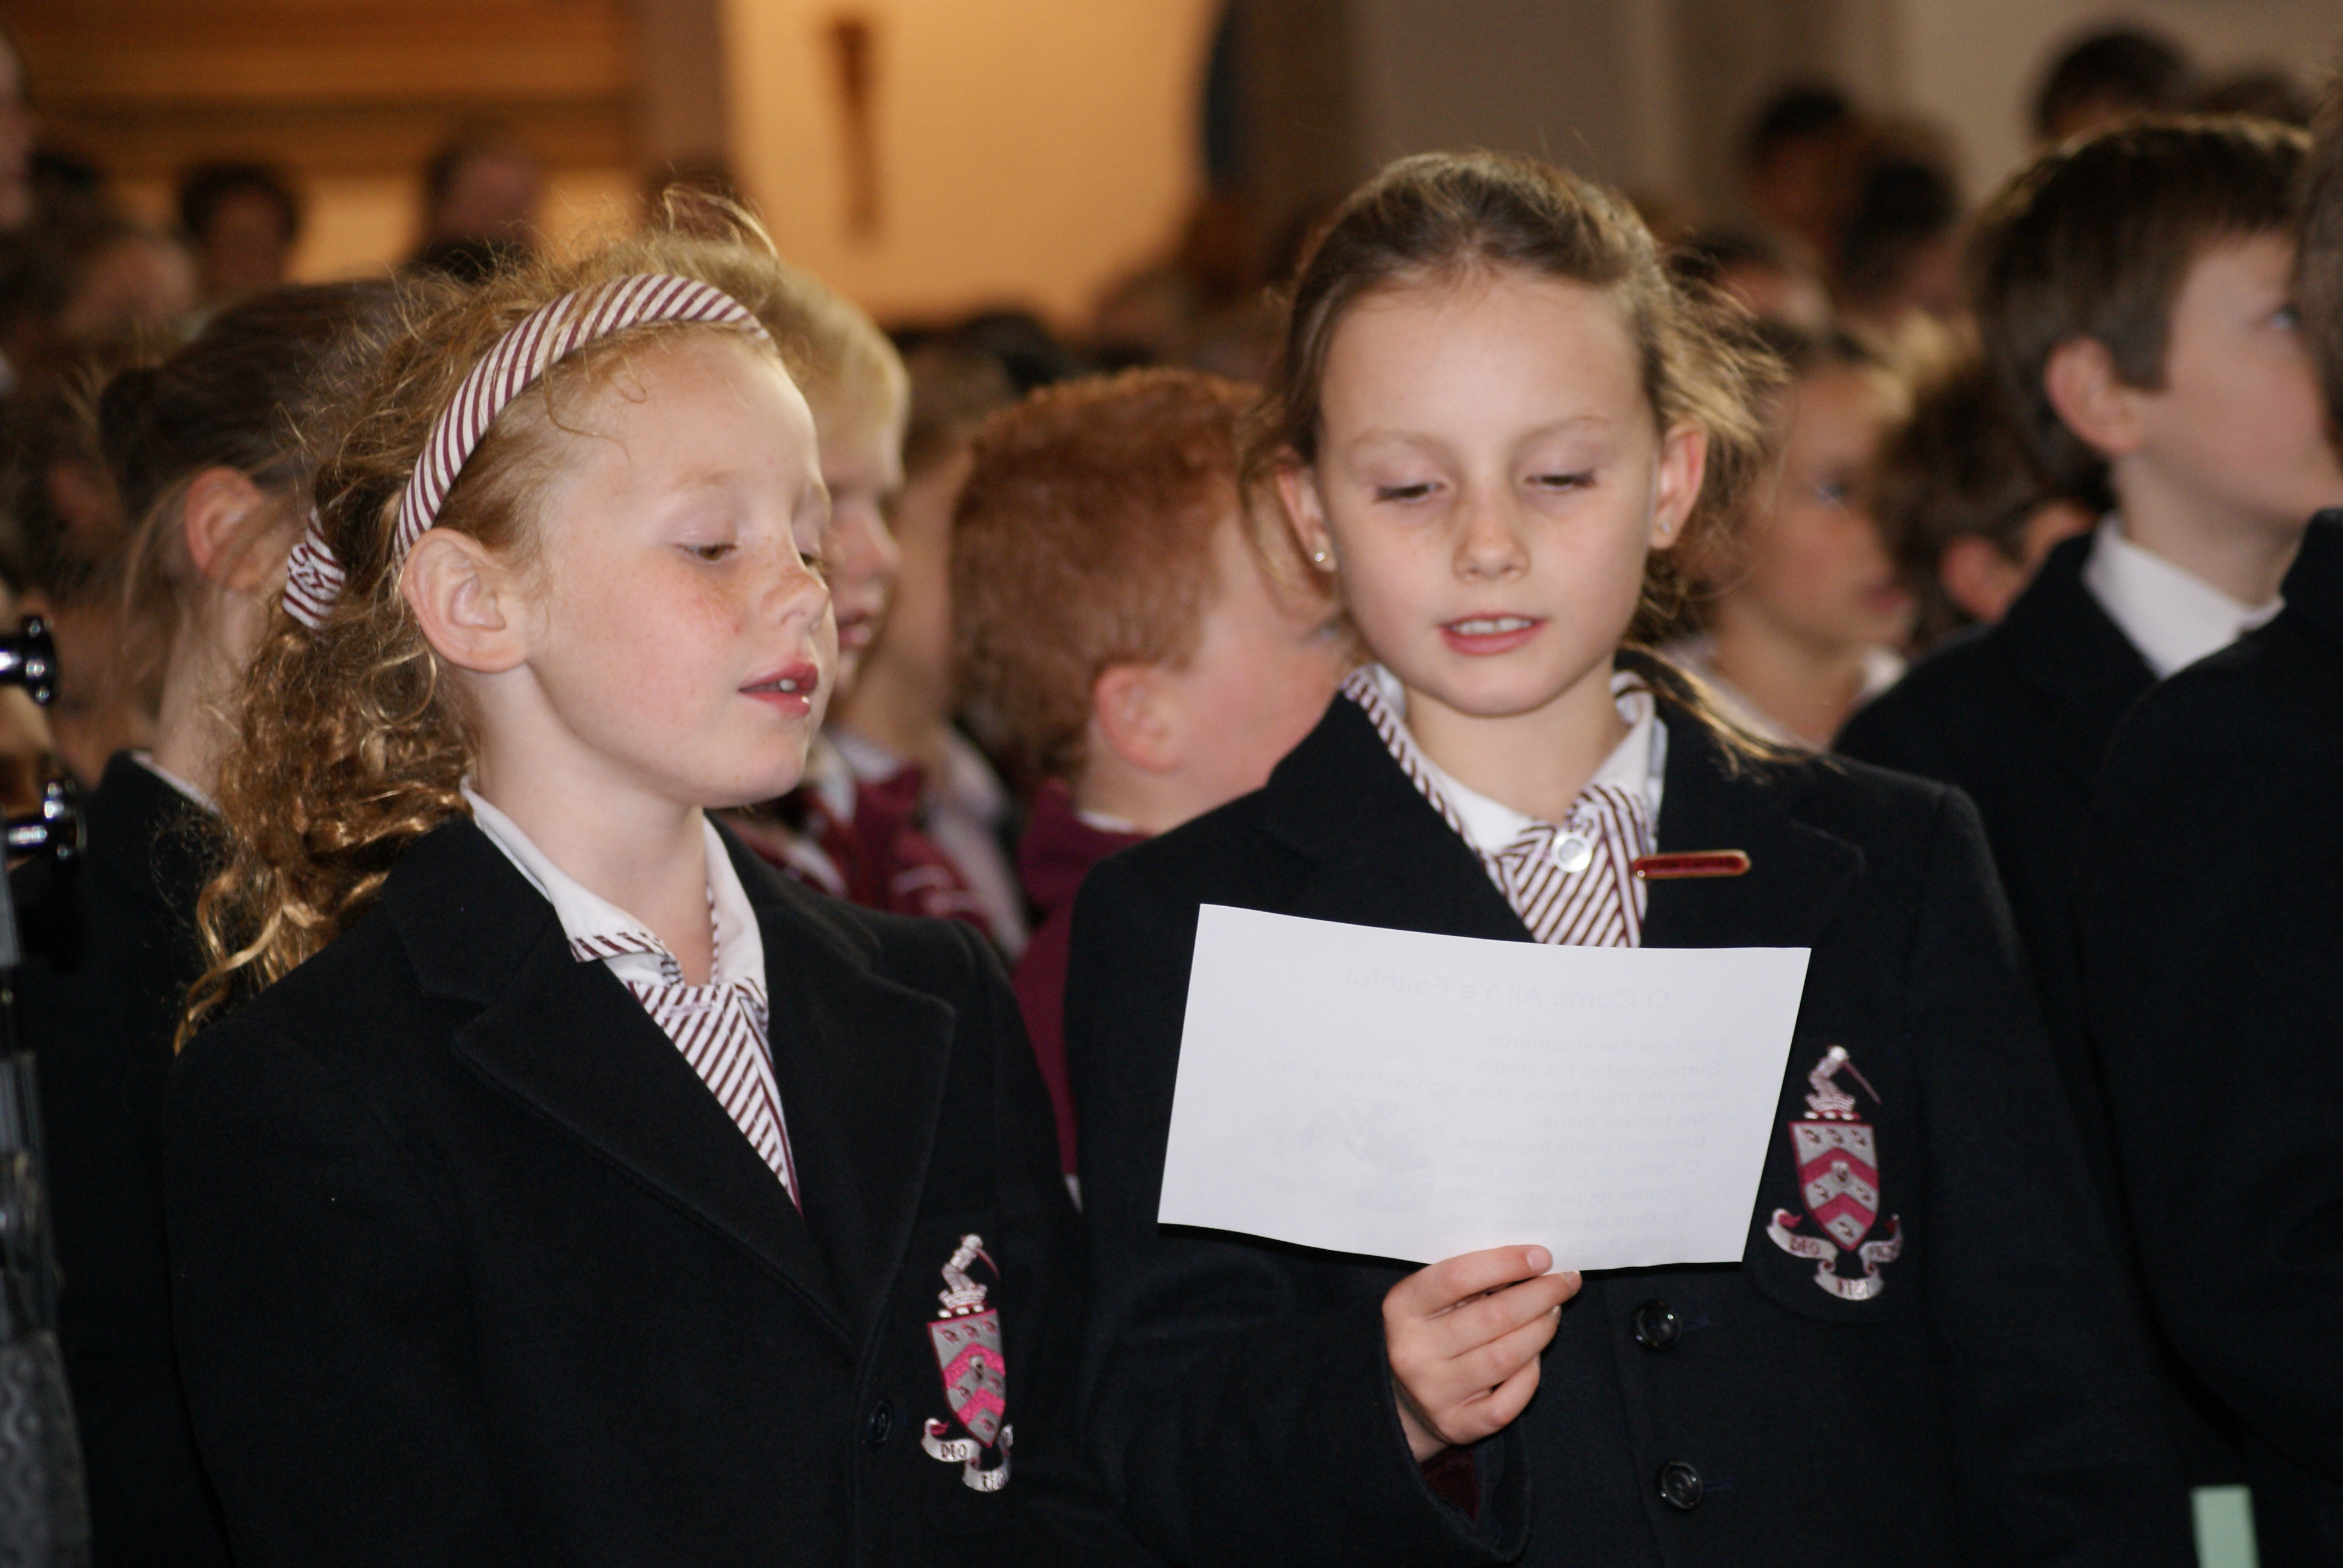 The Junior Choir (Years 3 and 4)